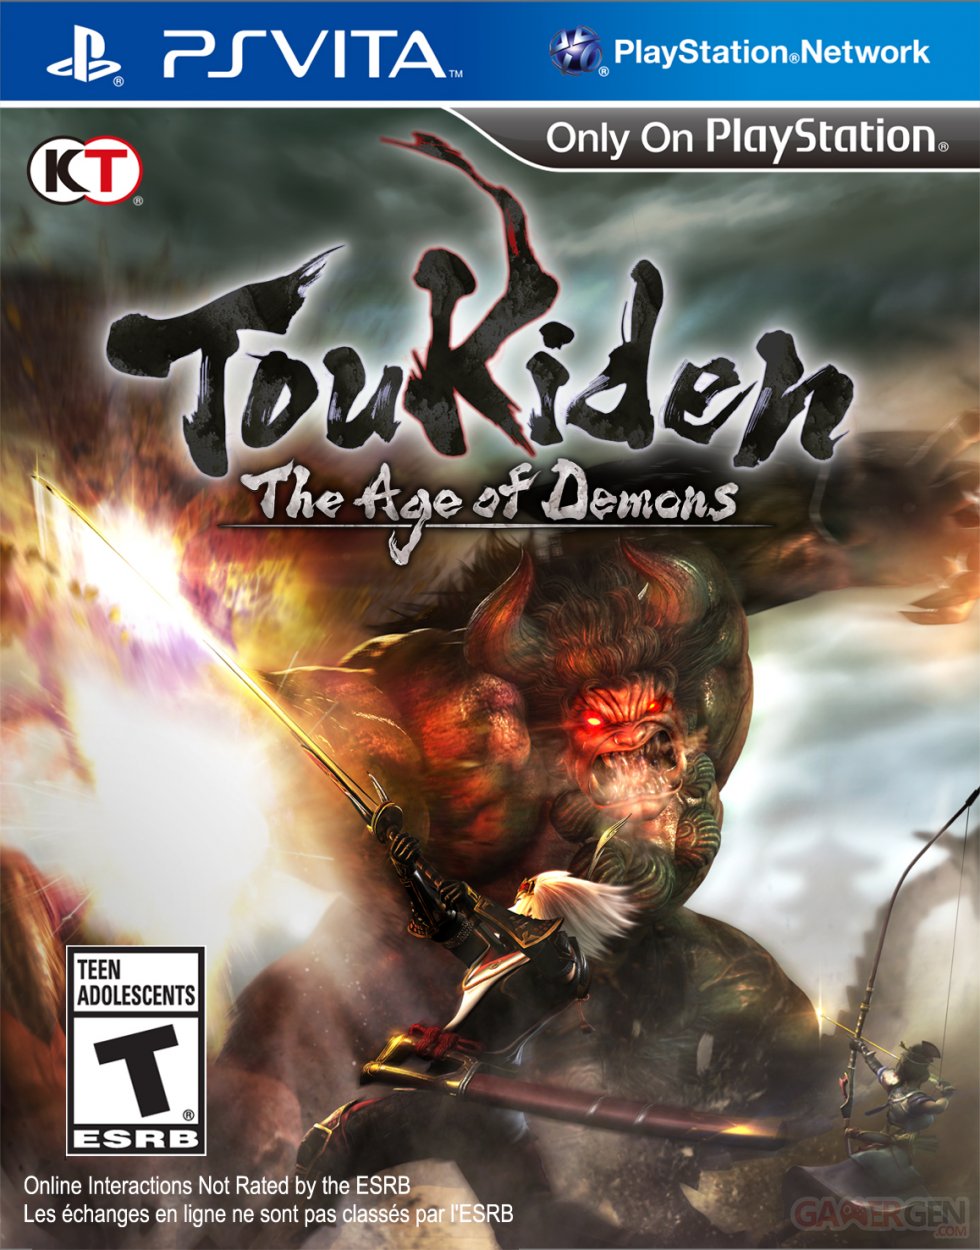 toukiden-the-age-of-demons jaquette 28.11.2013 (47)